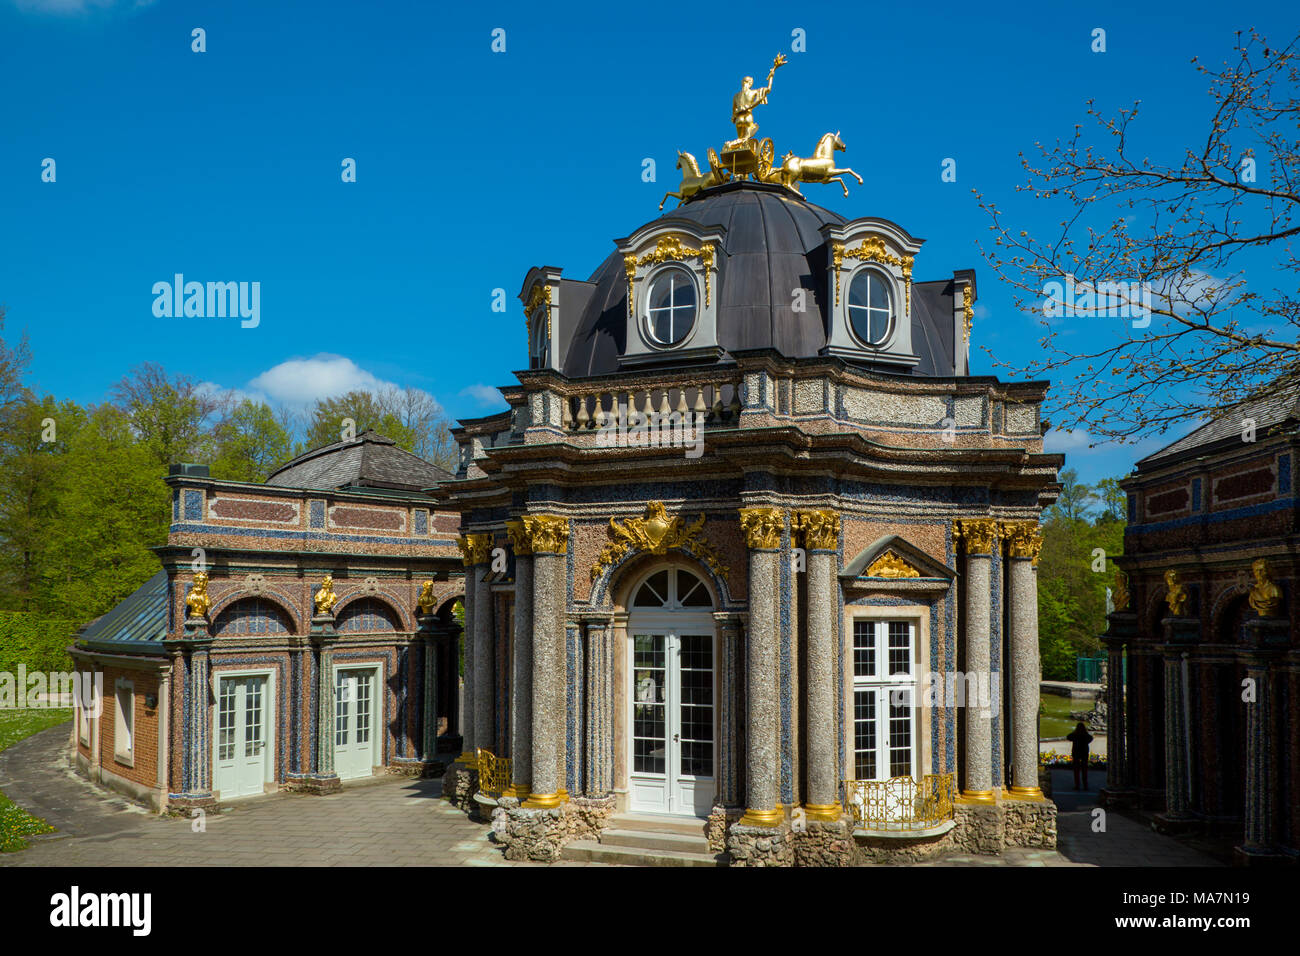 The Eremitage with its Sun Temple.Wilhelmina had the Neues Schloss built in 1736 by J. Saint-Pierre. The Temple of the Sun, hemicycle, is the center. Stock Photo